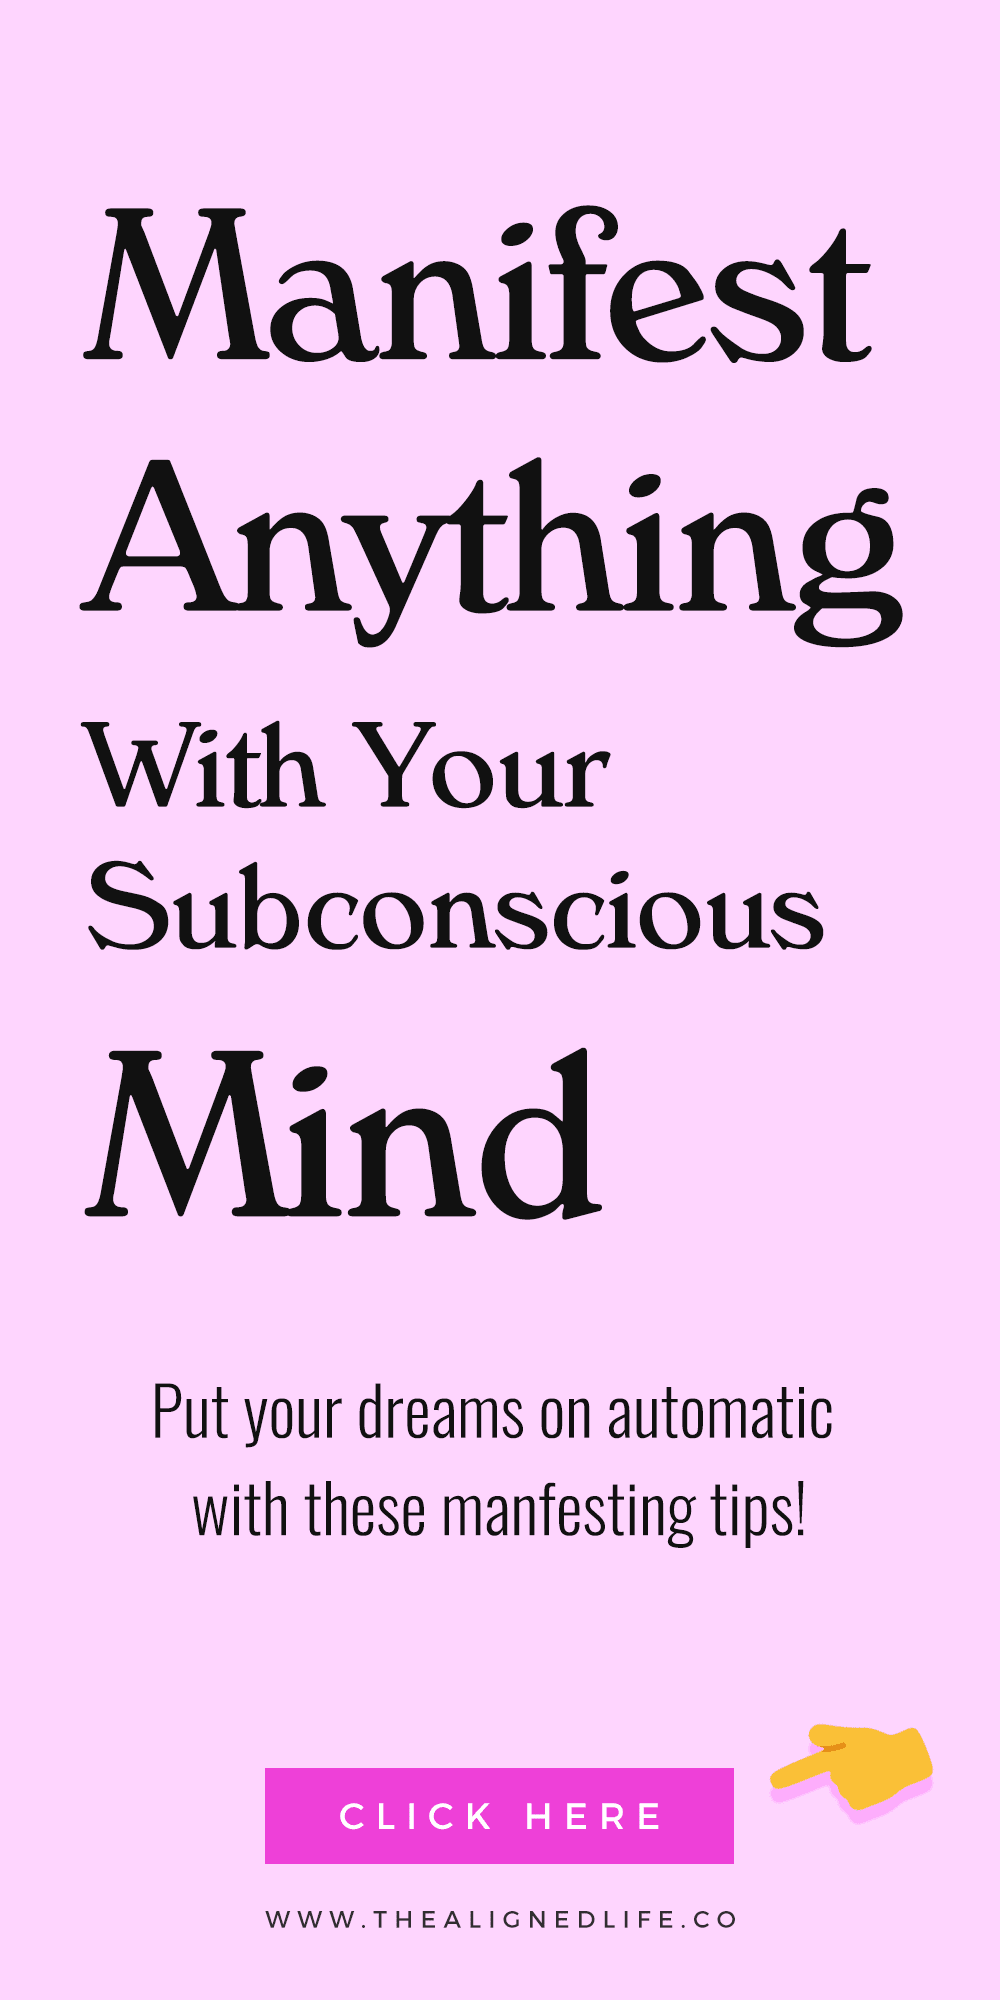 How To Program Your Subconscious Mind To Manifest Anything